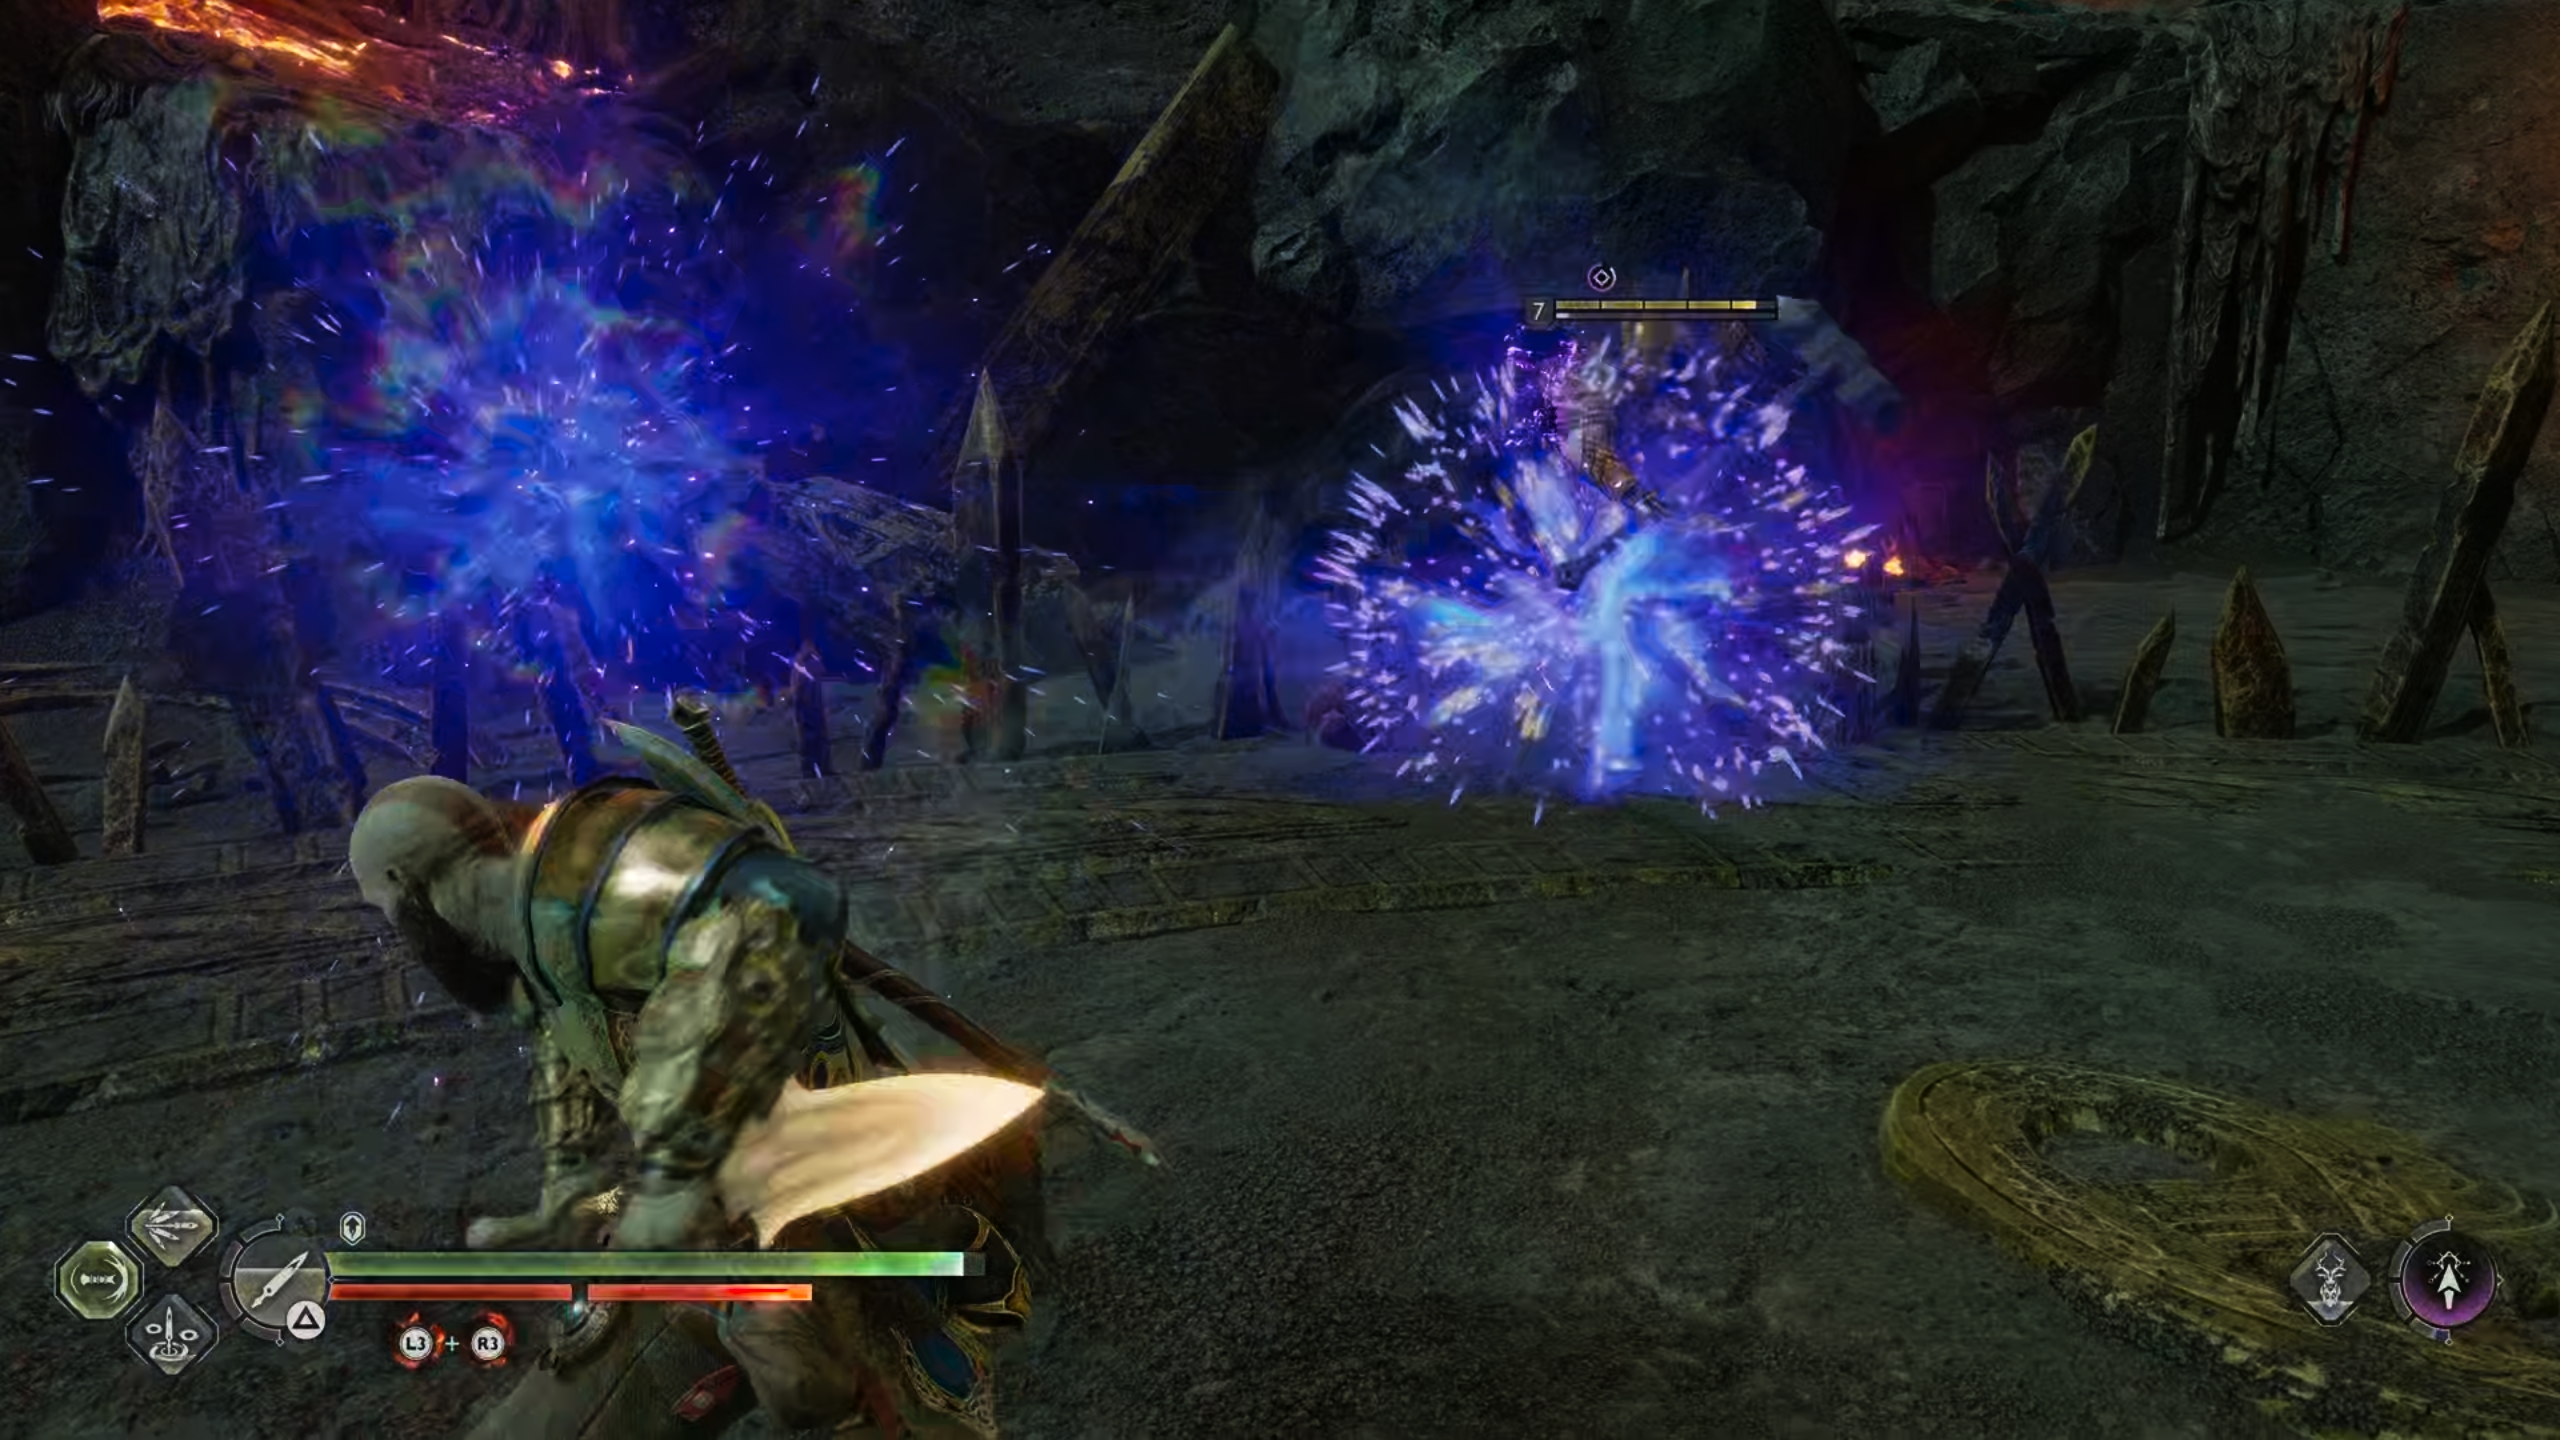 Look out for these blue / purple lights when the boss teleports.